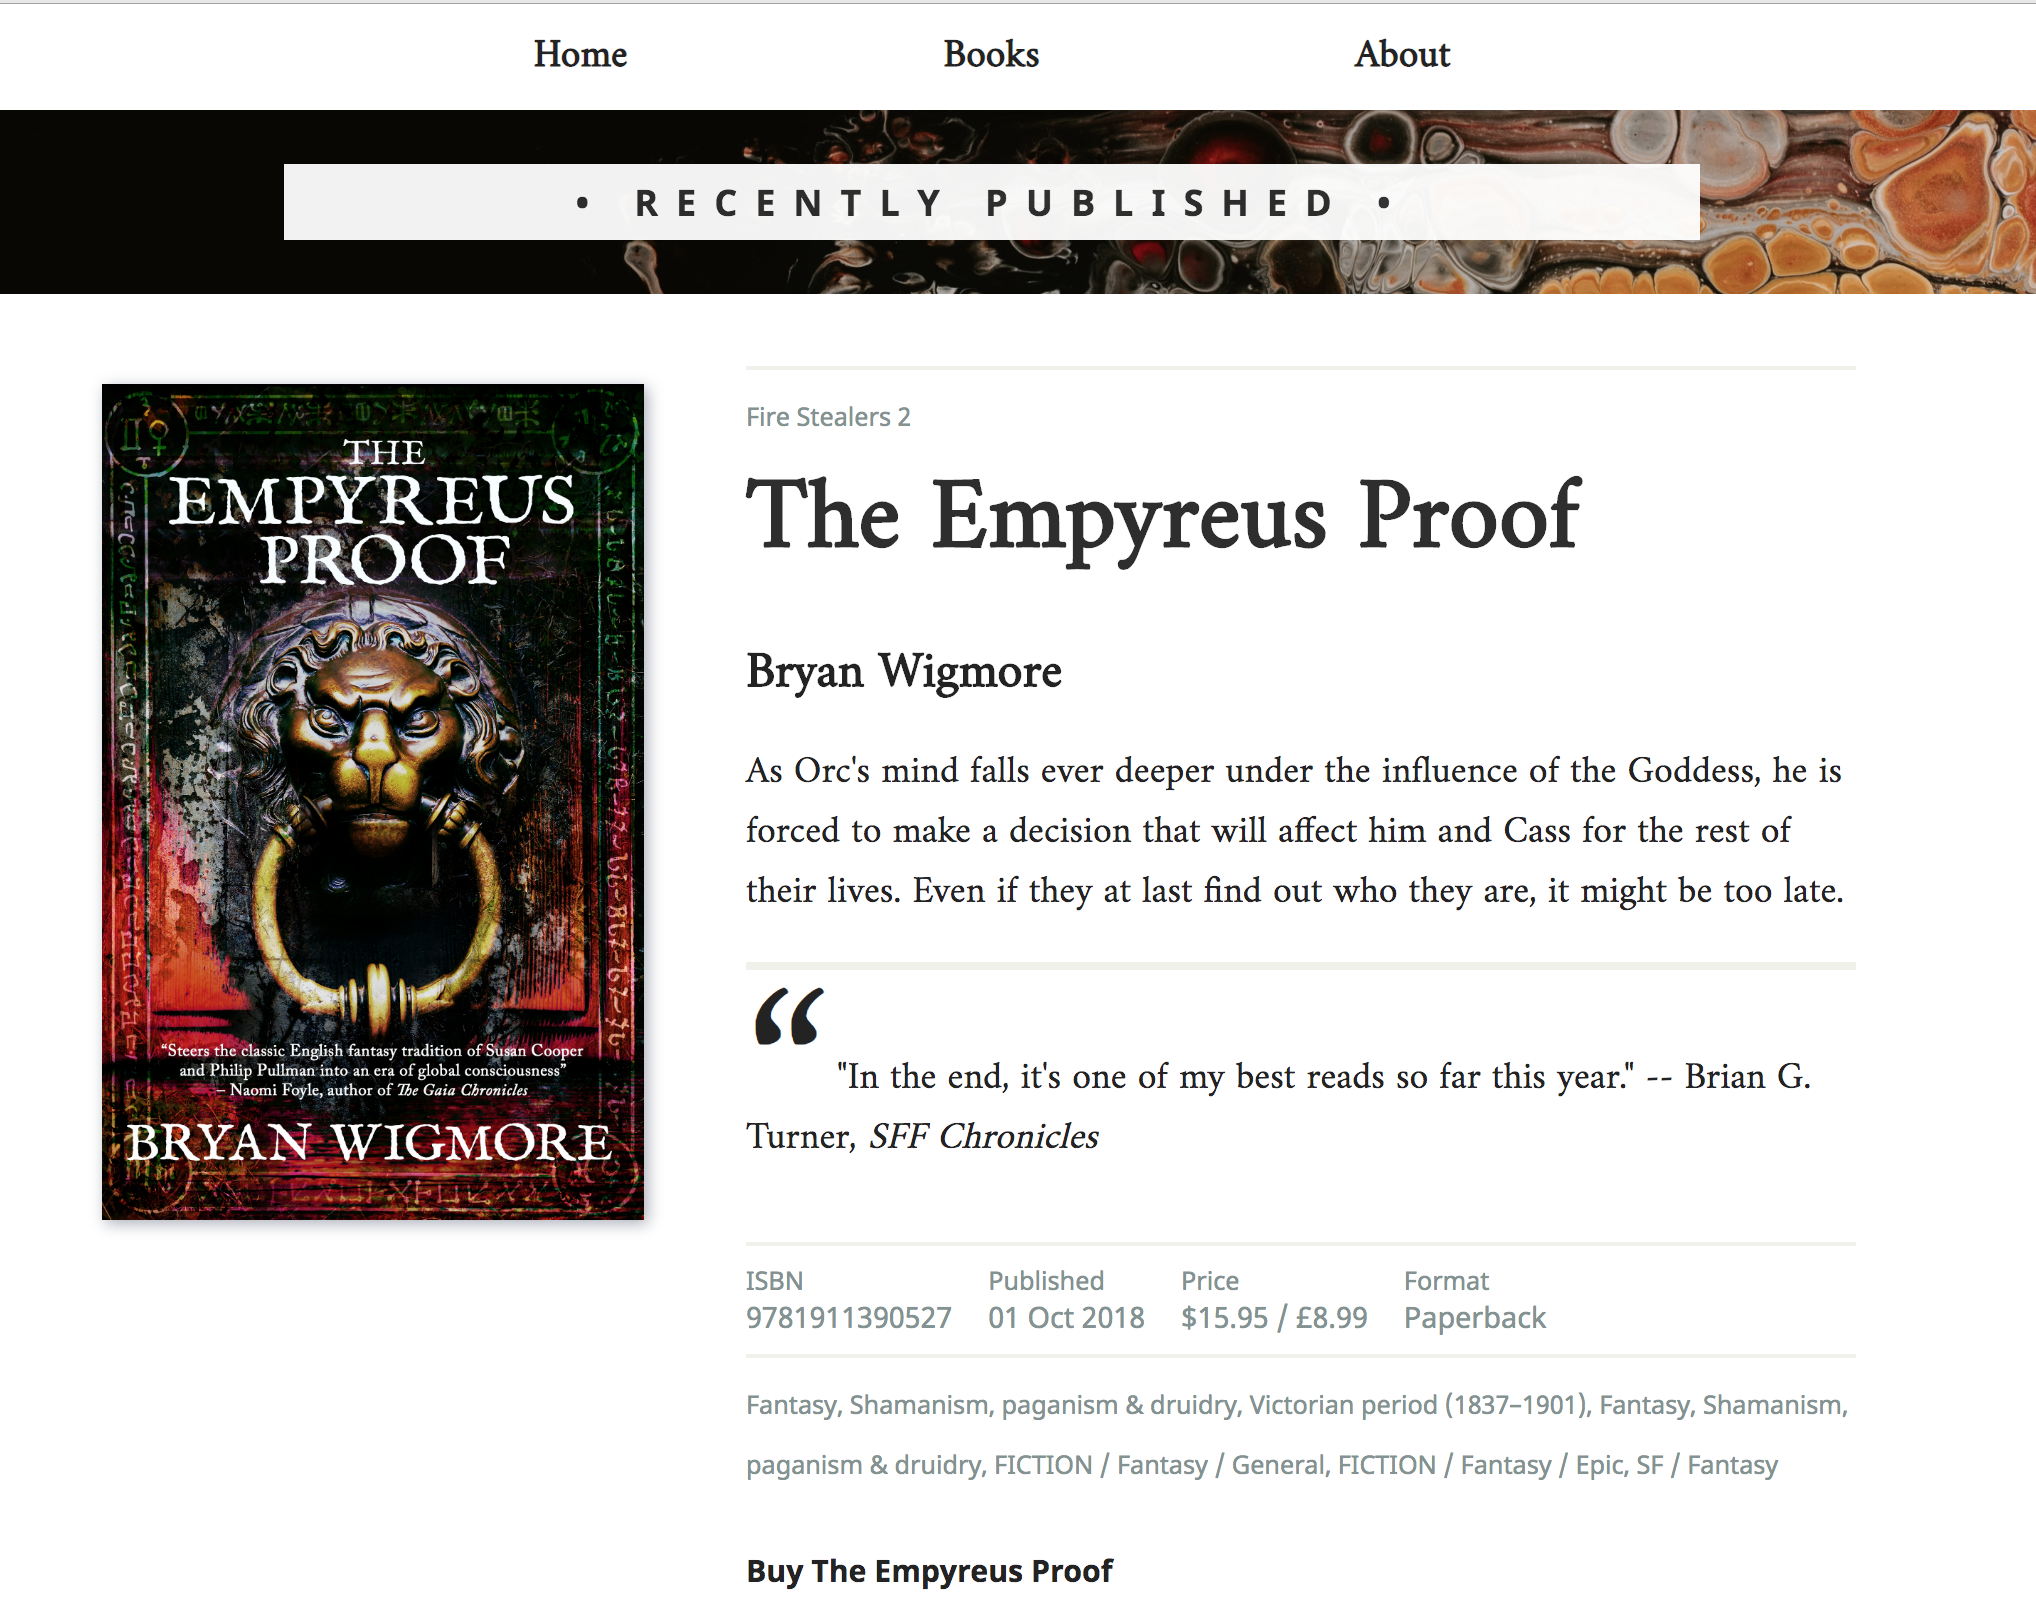 A screenshot of a really nicely laid out book page, with pricing, subject metadata, a well-designed cover, the blurb, the author names and the series, too, with a review quote.